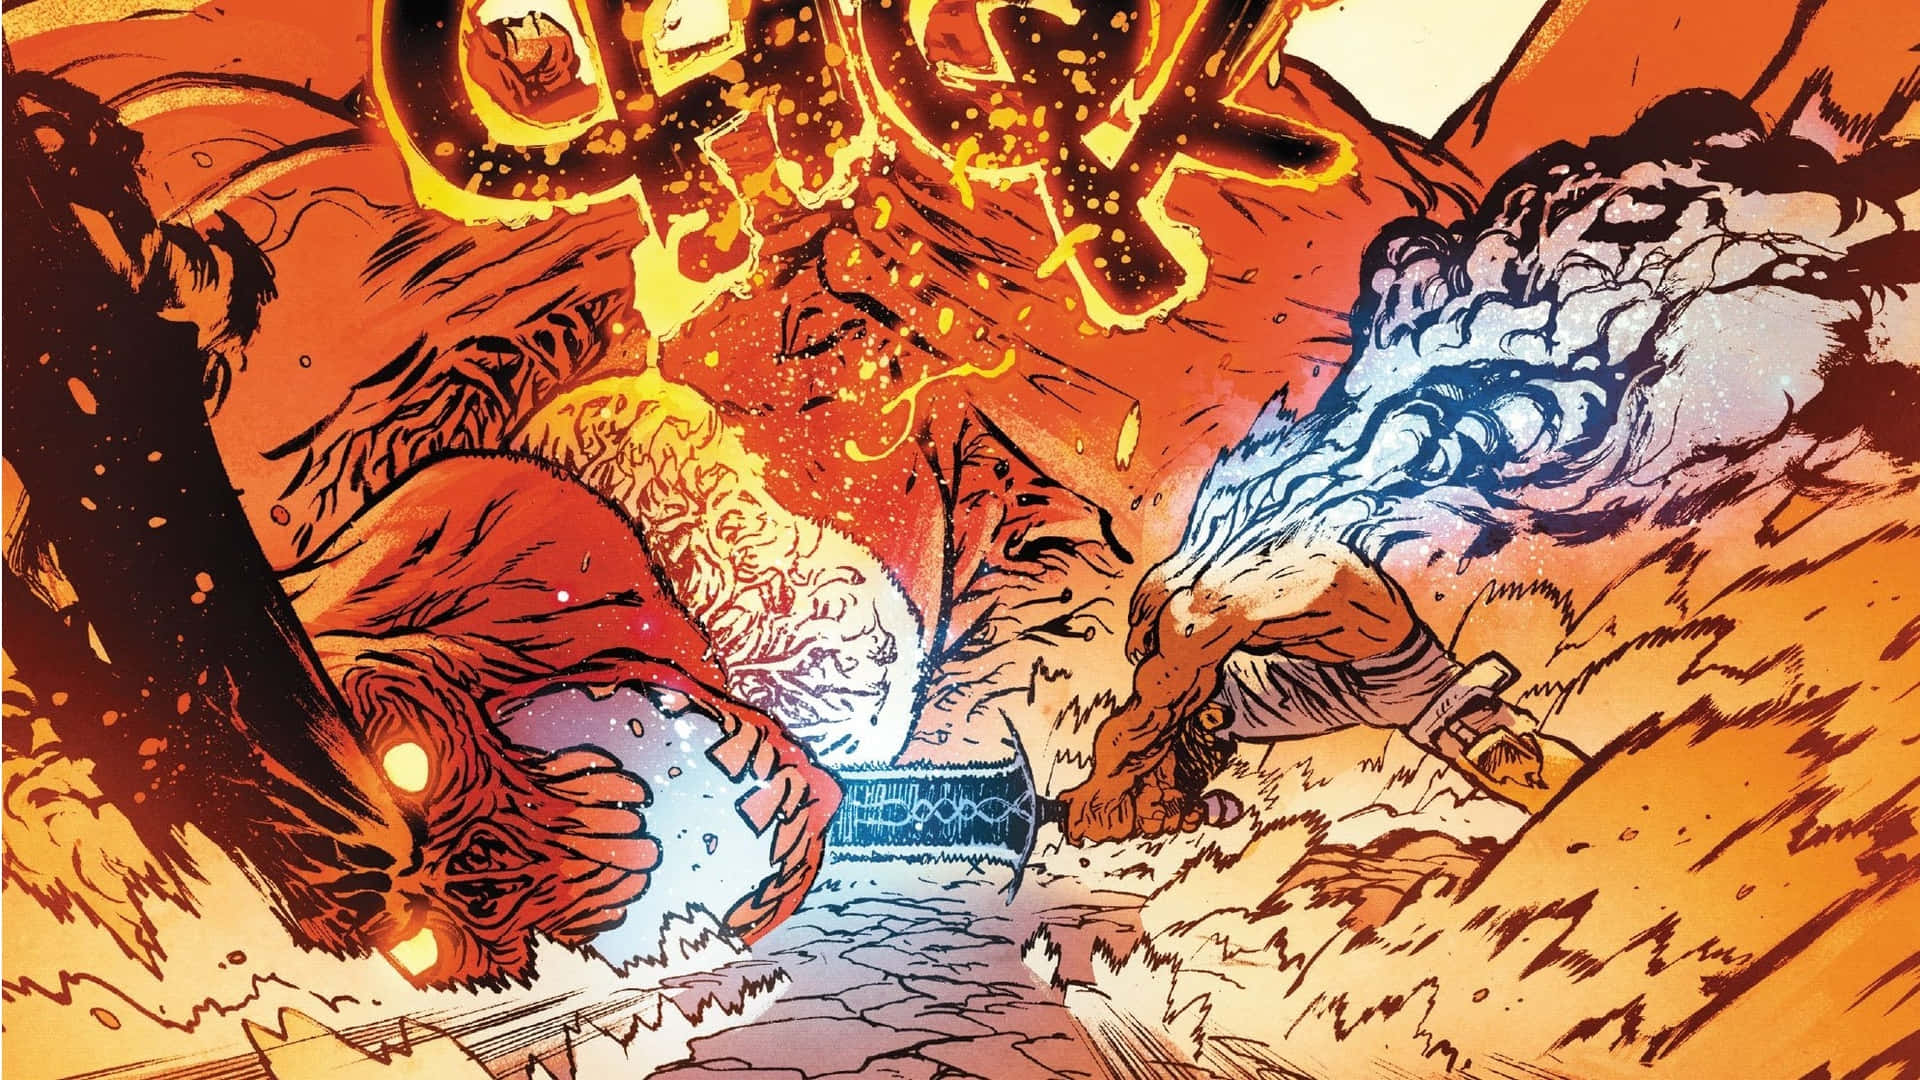 Locked in an eternal fight with Asgard, Surtur emerges as a force of destruction Wallpaper